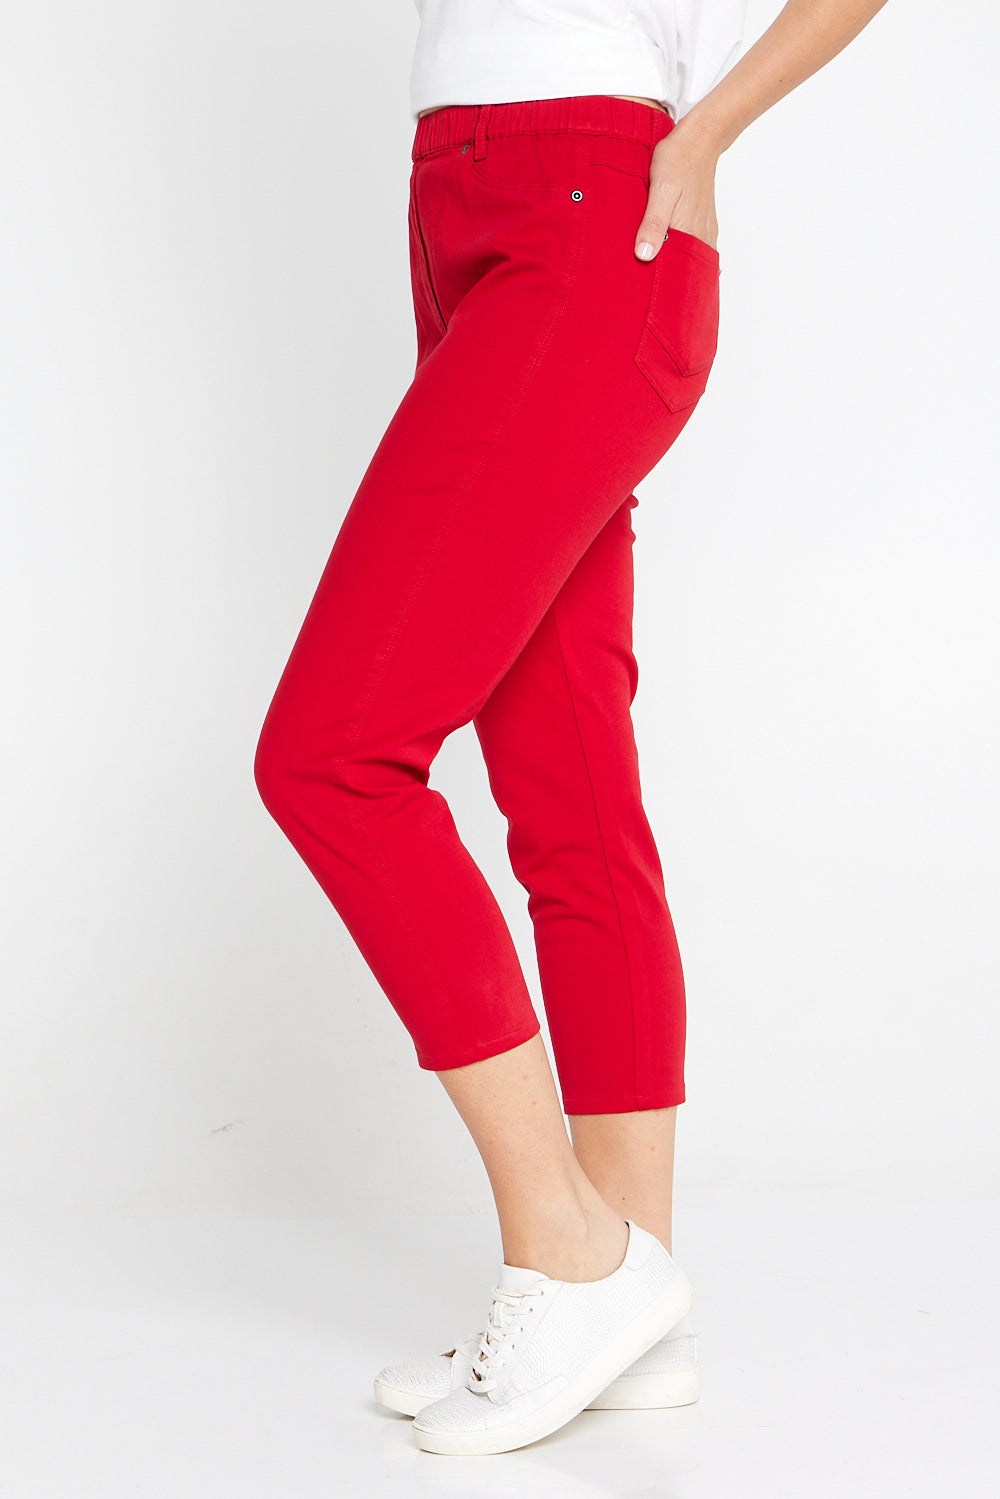 Women’s Relaxed Fit Capri in Cafe